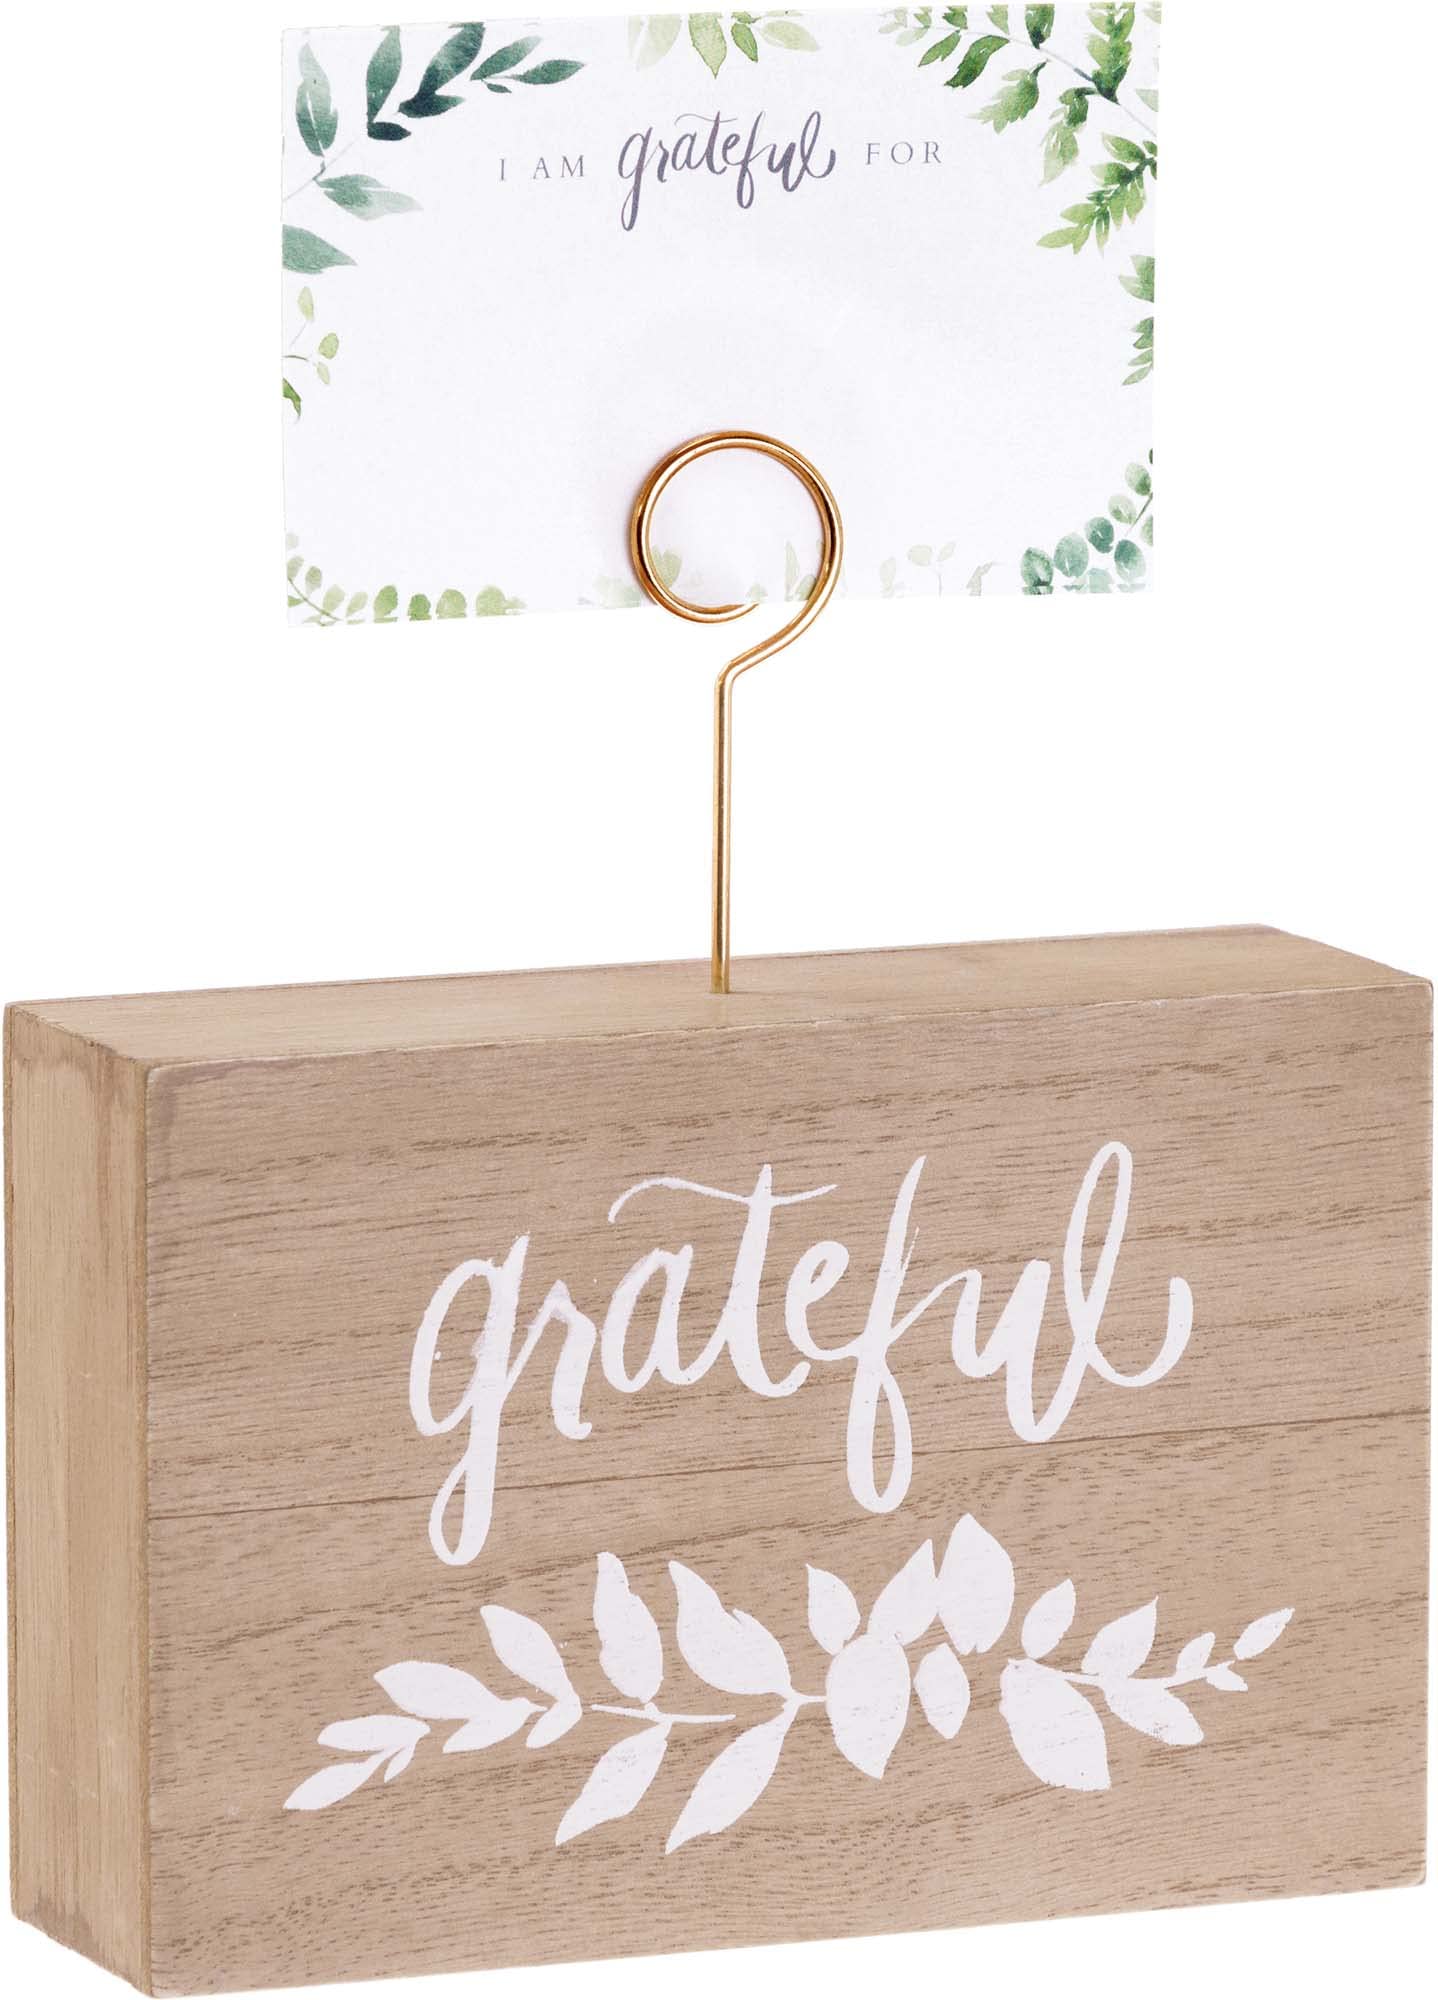 Eccolo Heatherlee Chan Desk Stand with Gratitude Note Cards